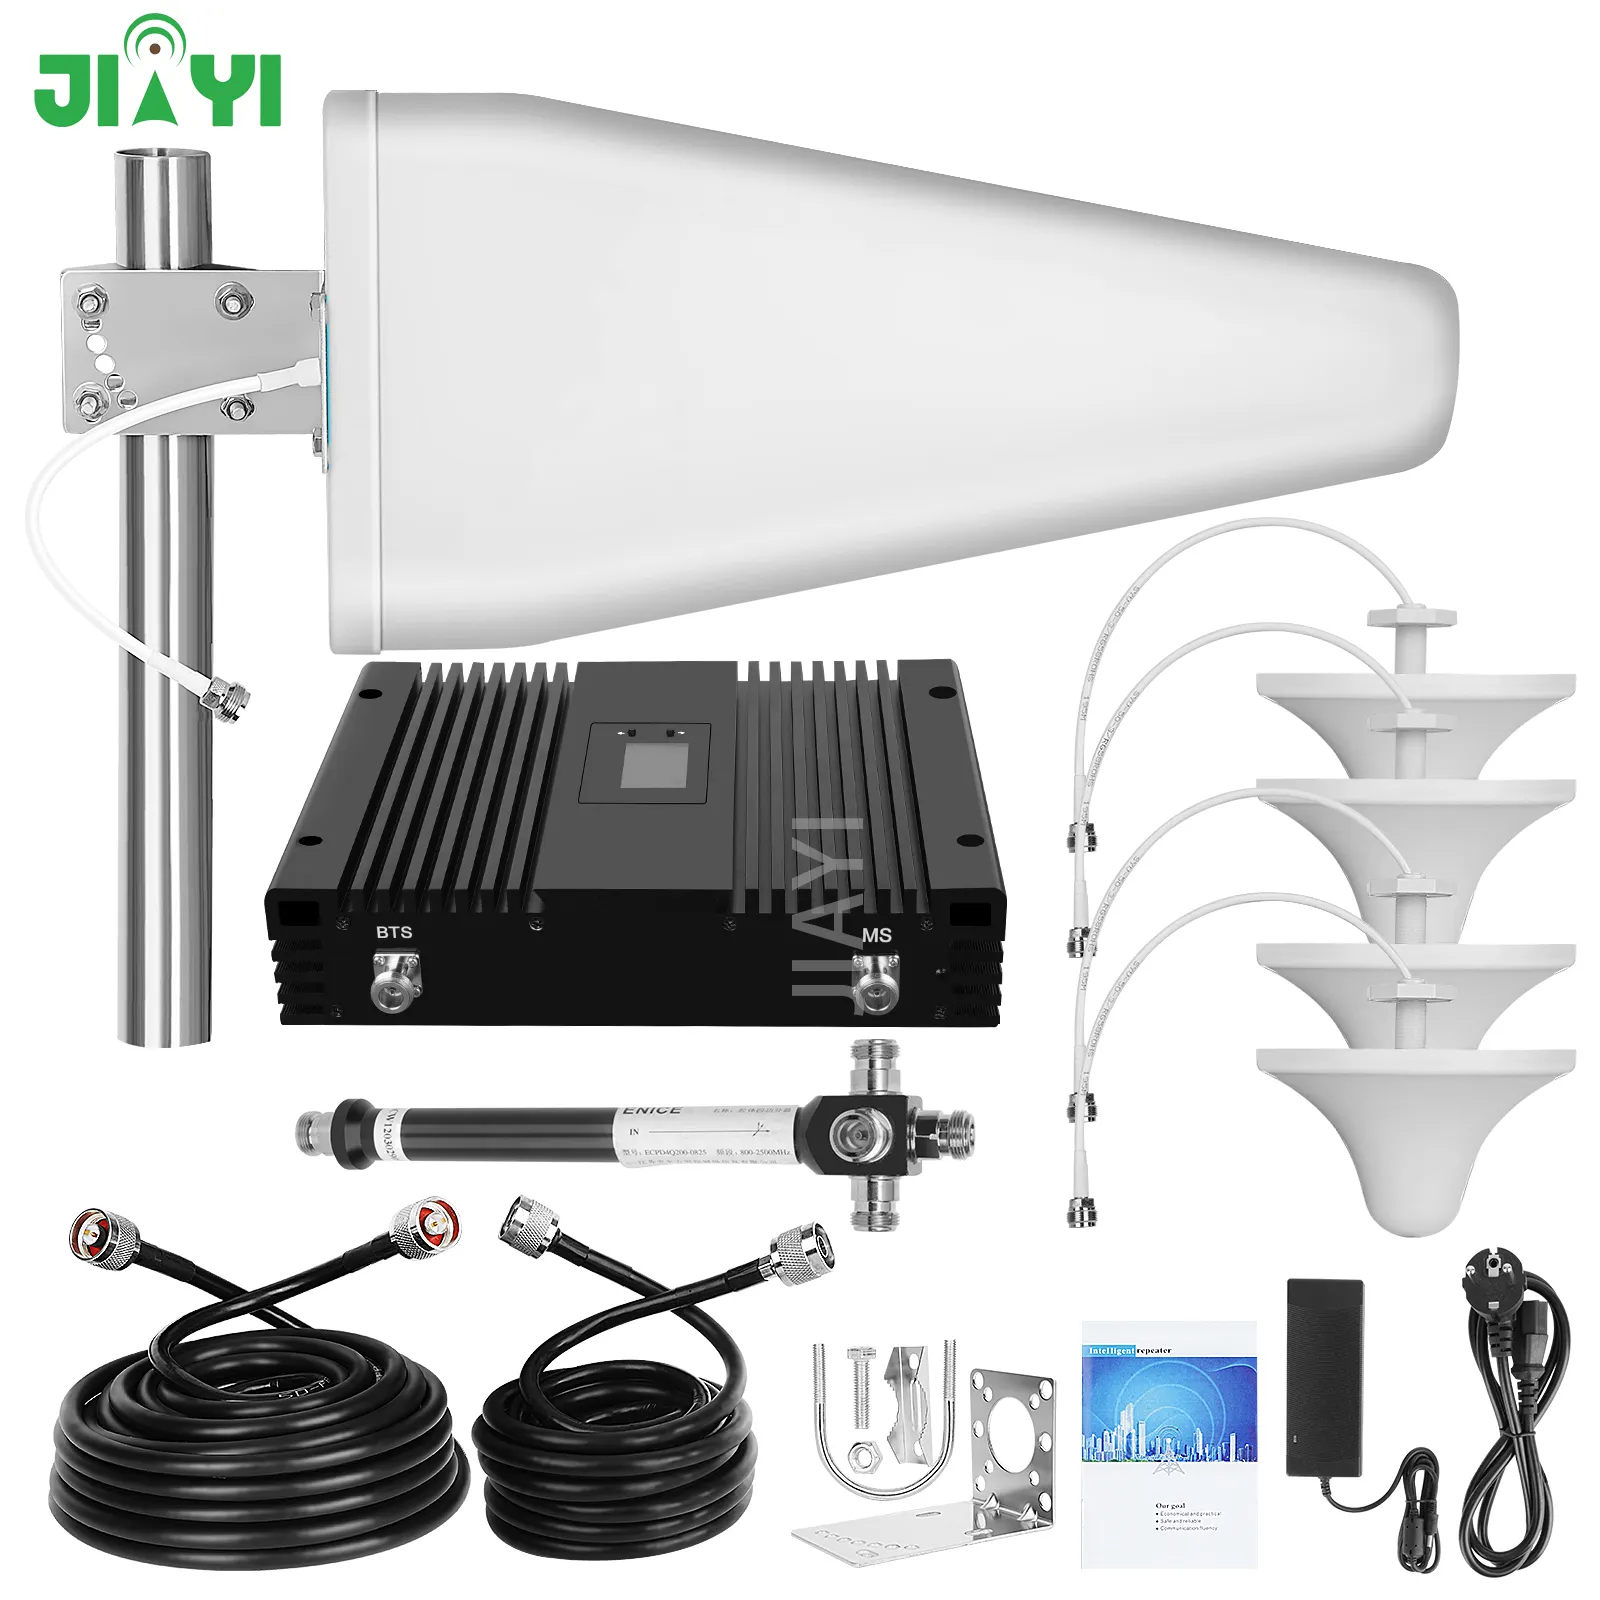 High power mobile signal booster 4g signal 900MHZ 1800MHZ 2100MHZ 2g 3g 4g 5g signal booster with antenna